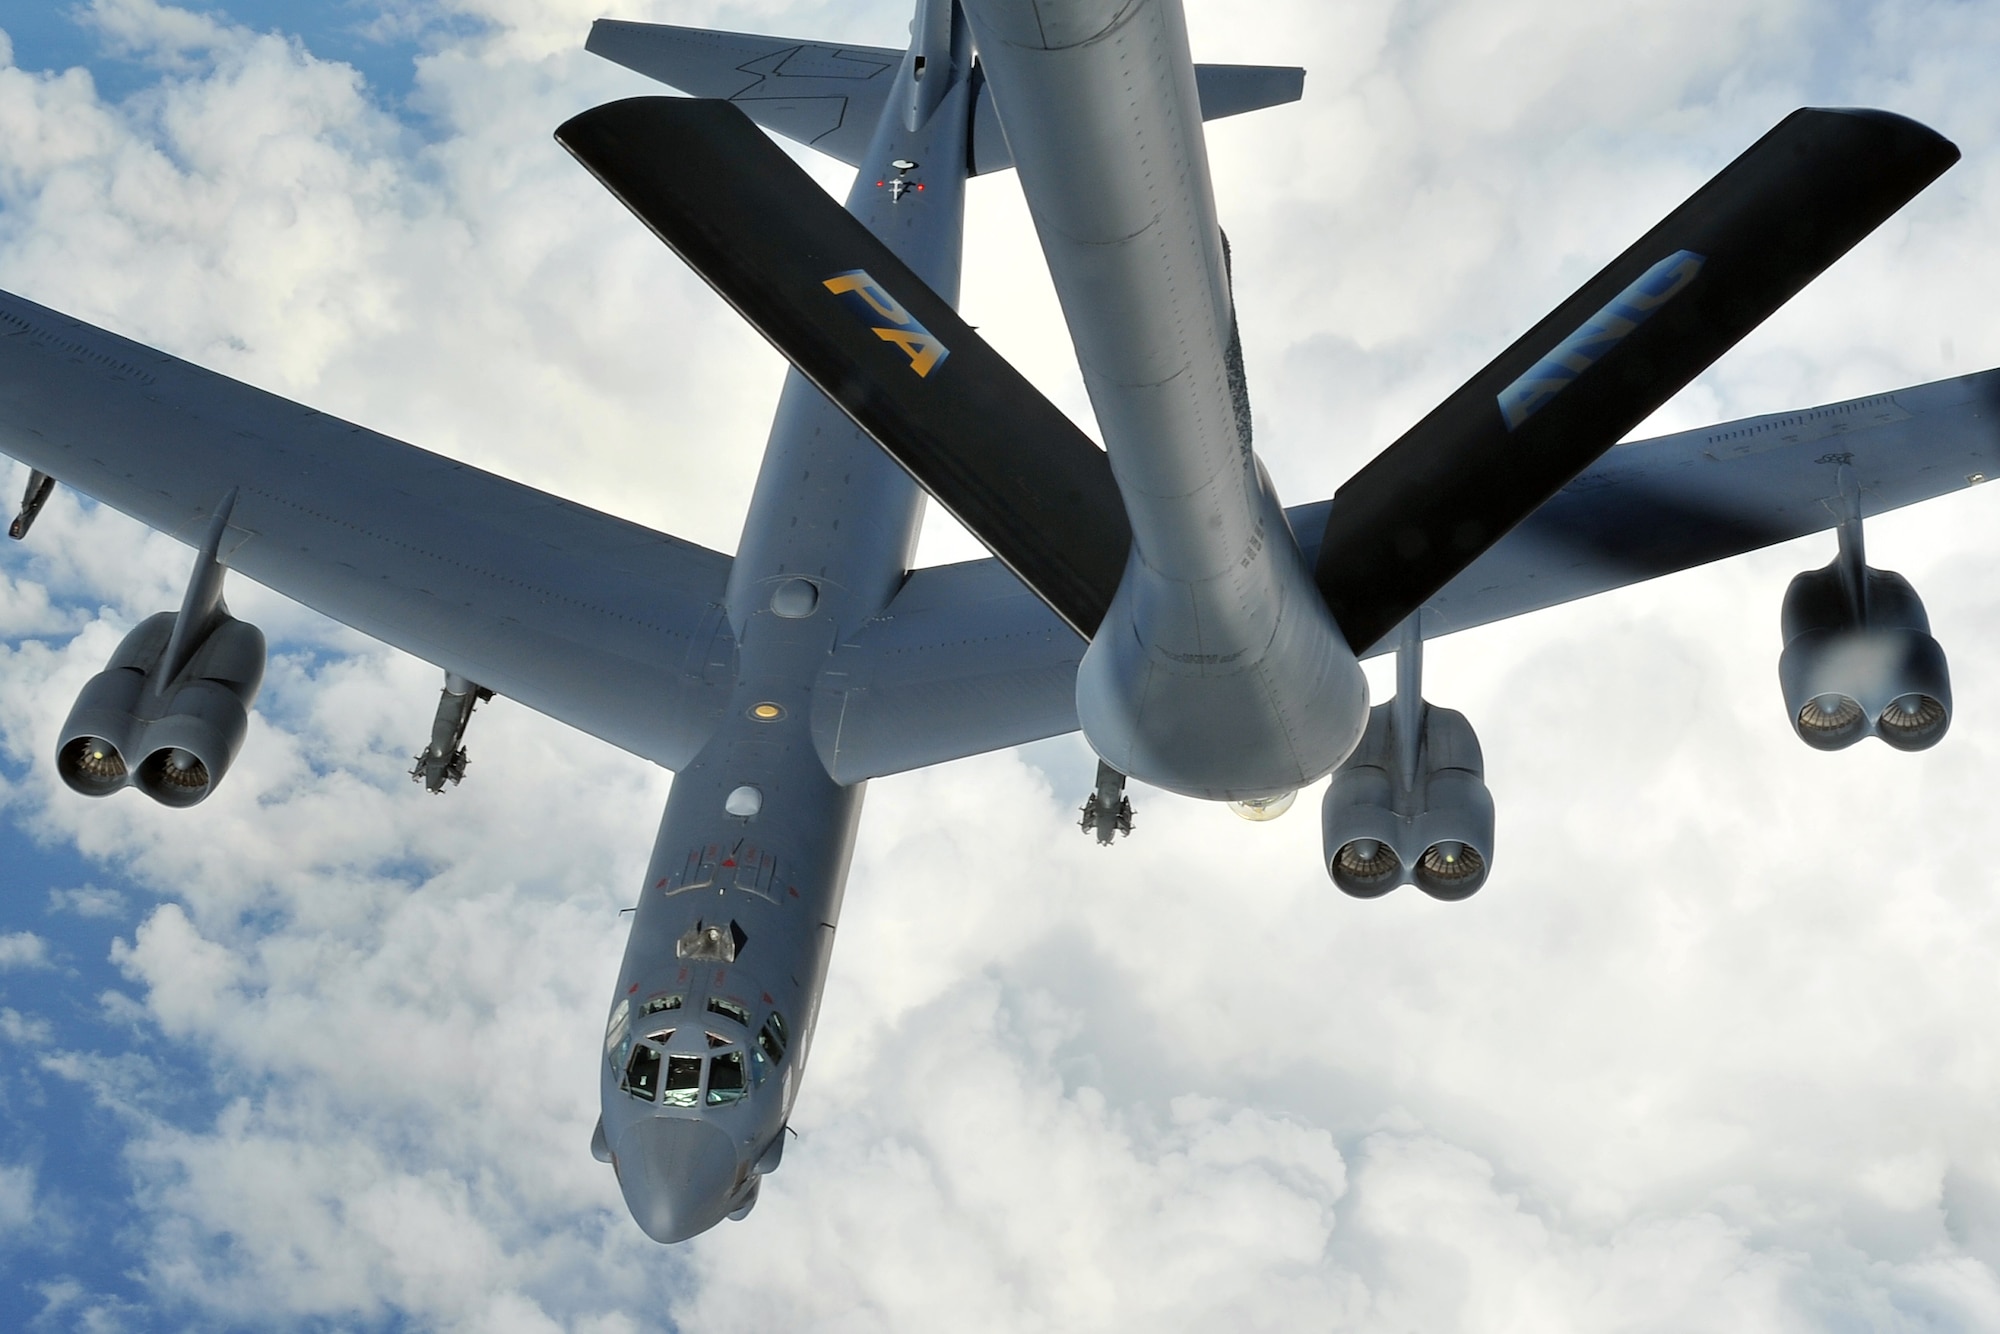 A 20th Expeditionary Bomb Squadron B-52 Stratofortress aircrew detaches from a KC-135 Stratotanker, from the Pittsburgh International Airport Air Reserve Station, Pa., after refueling in the Asia-Pacific region April 16, 2015. The B-52 crews are deployed from Barksdale Air Force Base, La., to Andersen AFB, Guam, in support of U.S. Pacific Command’s Continuous Bomber Presence to strengthen regional security and stability. (U.S. Air Force photo by Staff Sgt. Melissa B. White/Released)